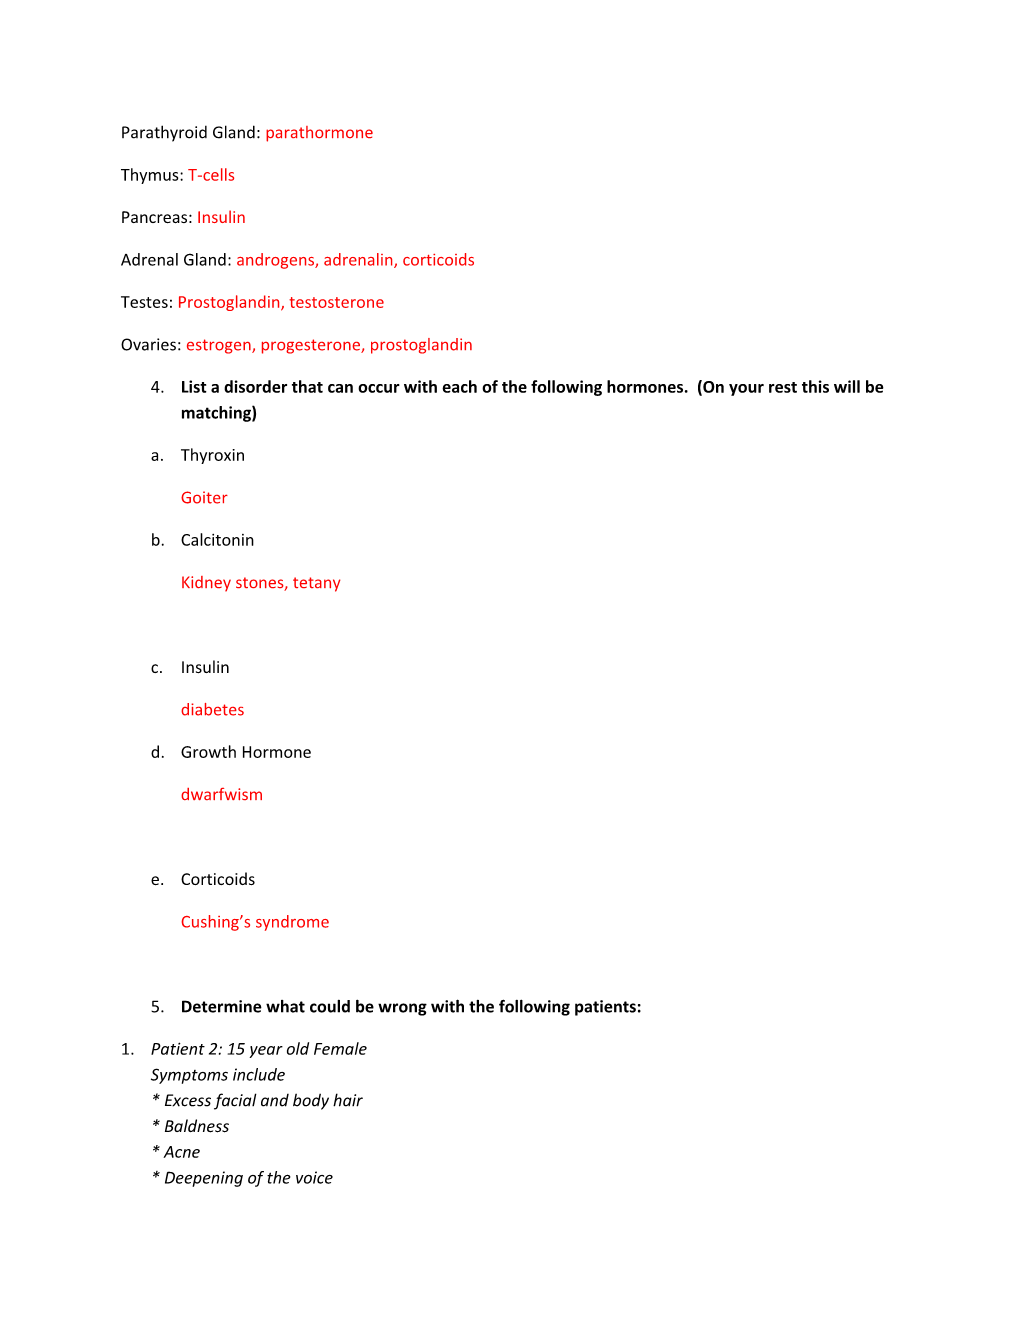 Endocrine System Study Guide ANSWER KEY